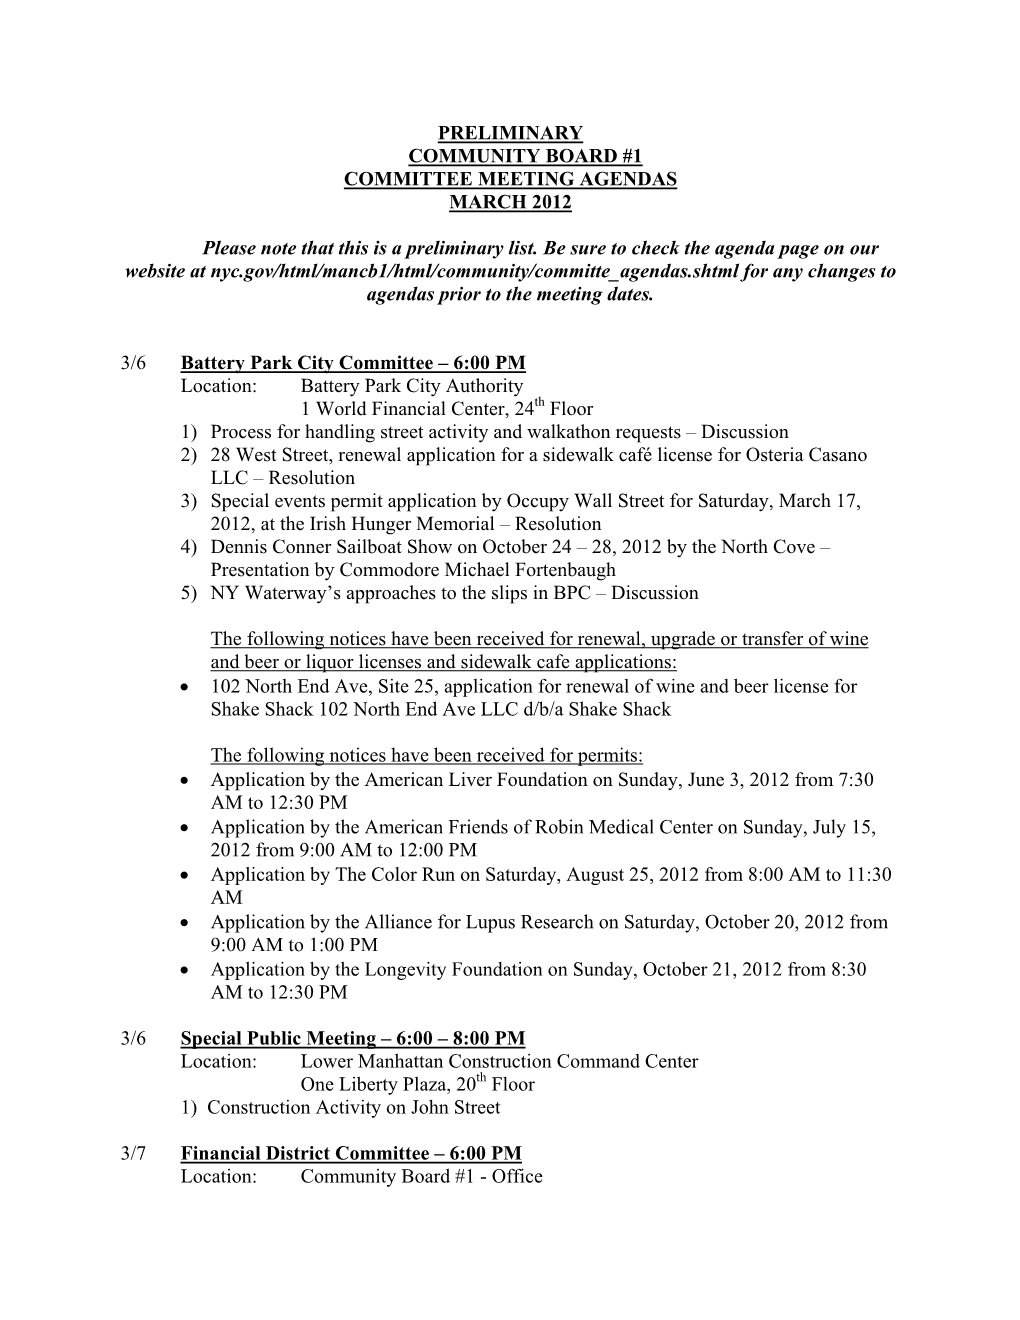 Preliminary Community Board #1 Committee Meeting Agendas March 2012